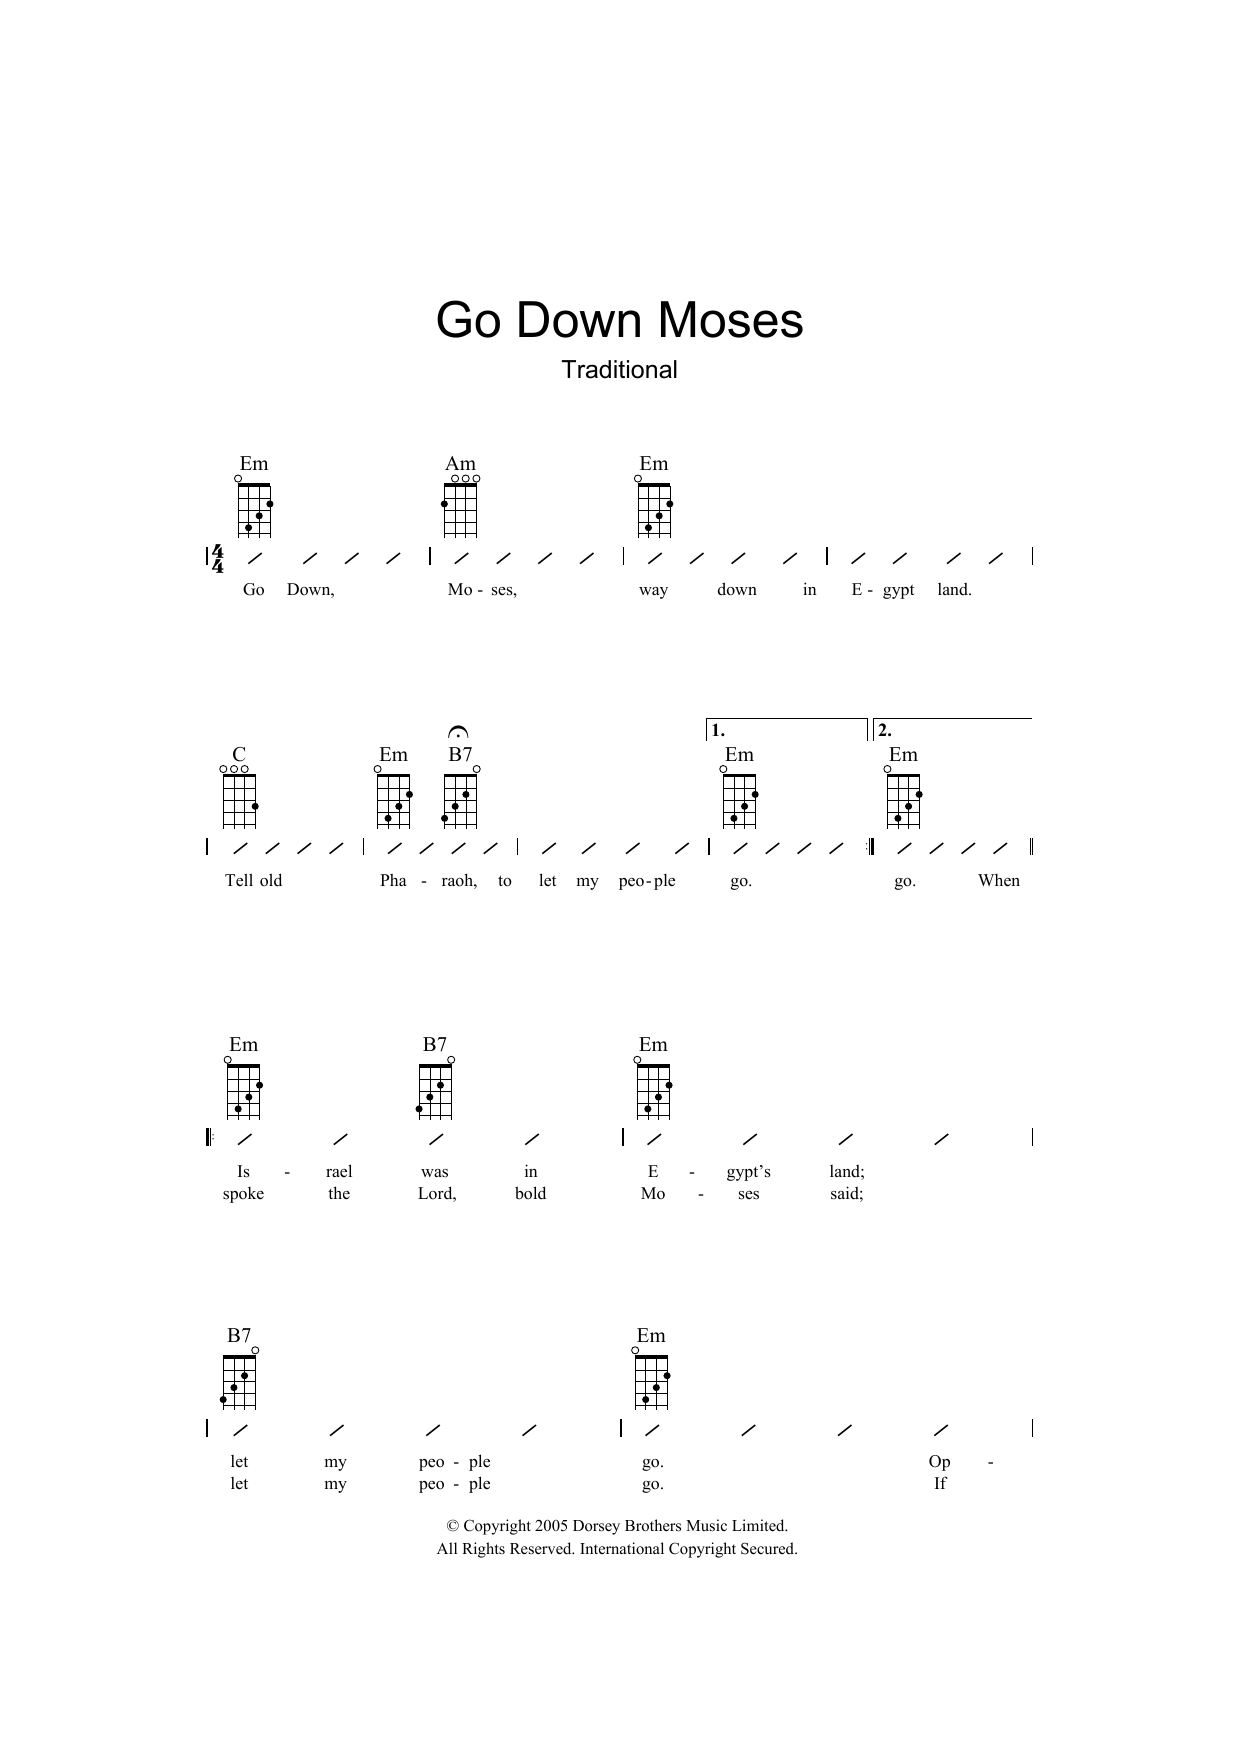 Download African-American Spiritual Go Down Moses Sheet Music